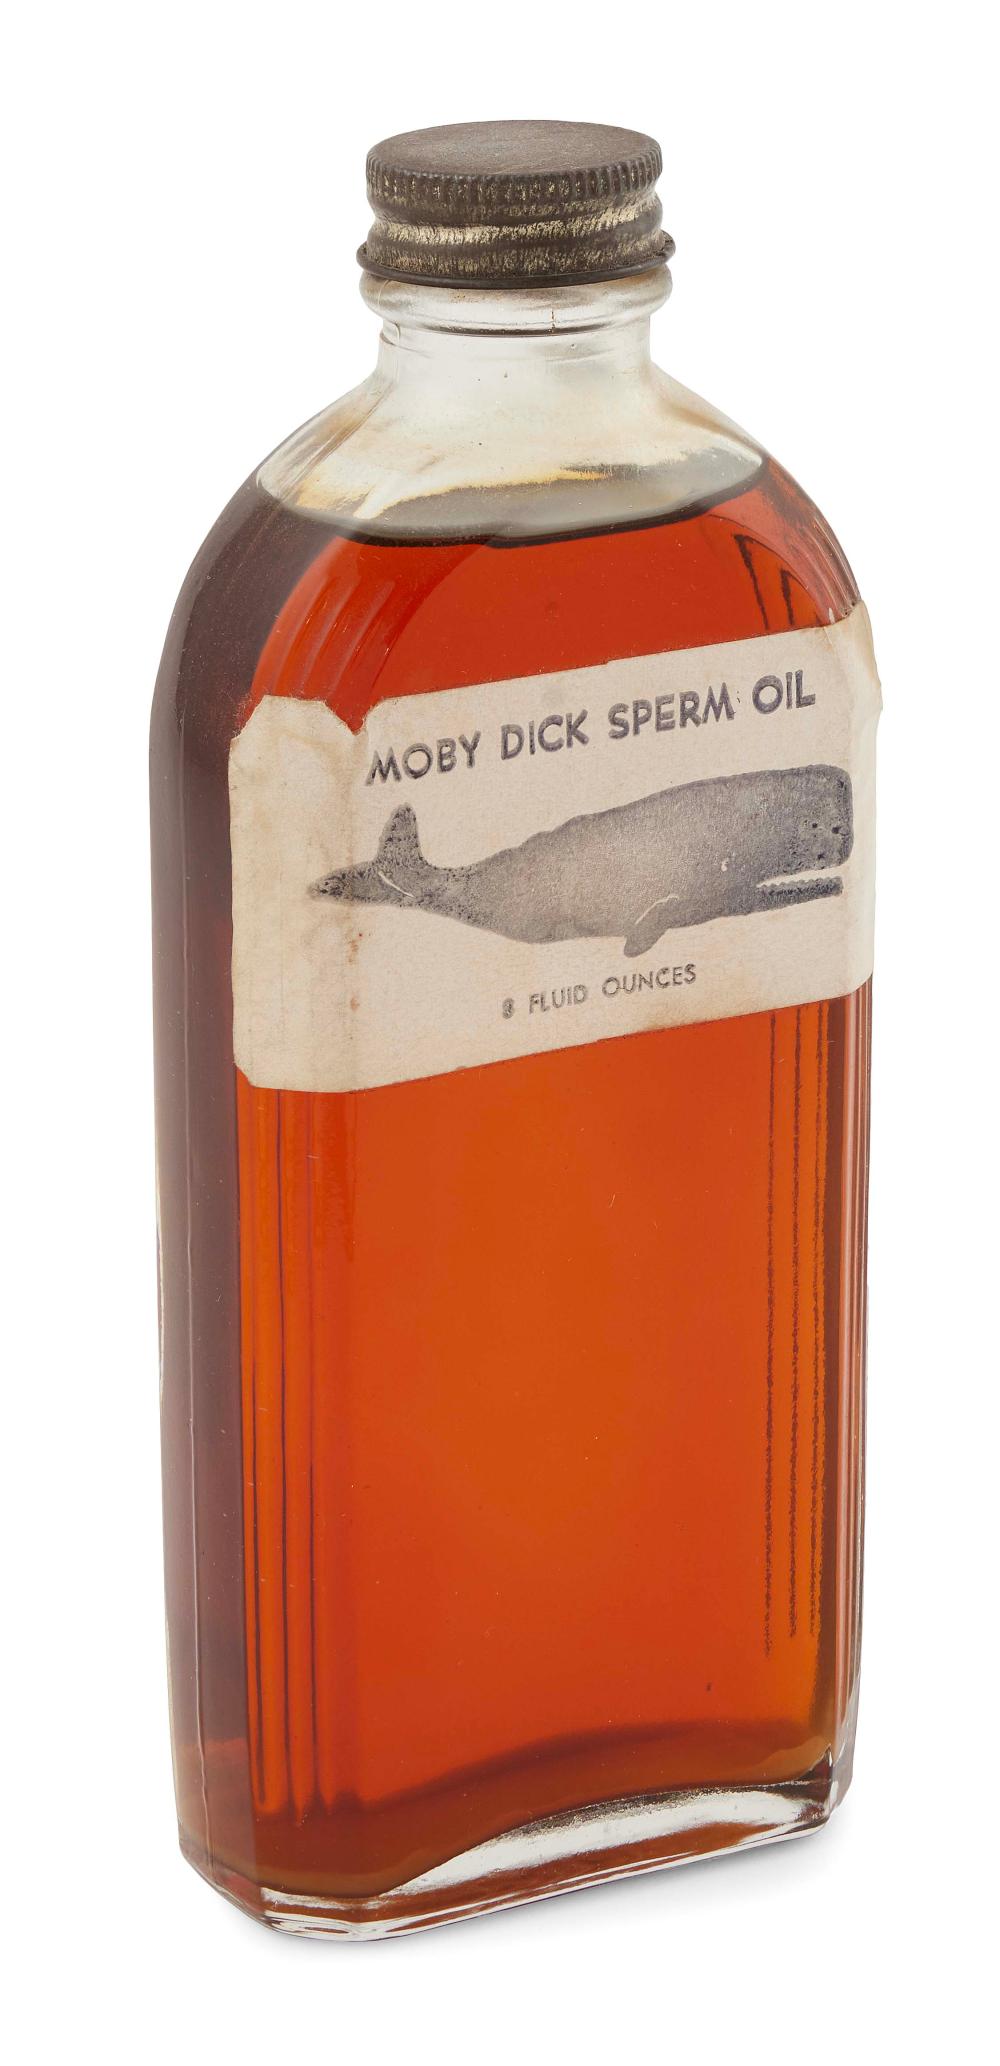 RARE BOTTLE OF "MOBY DICK SPERM